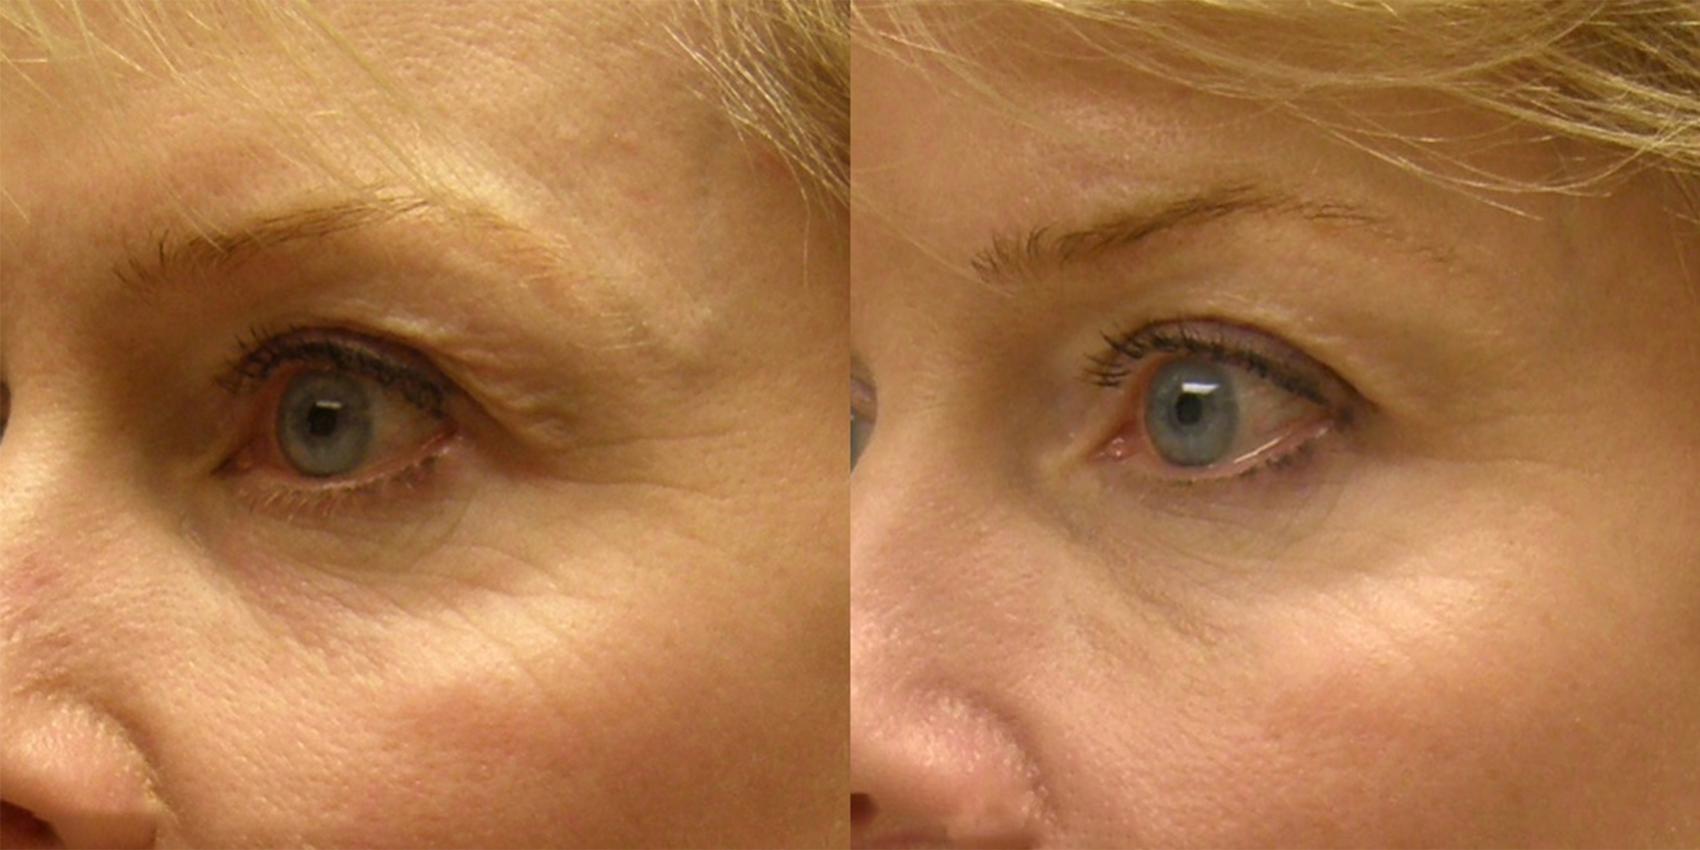 This photo shows before and after of ThermiSmooth eyes treatment where fine lines around the eyes are noticeability smoother.